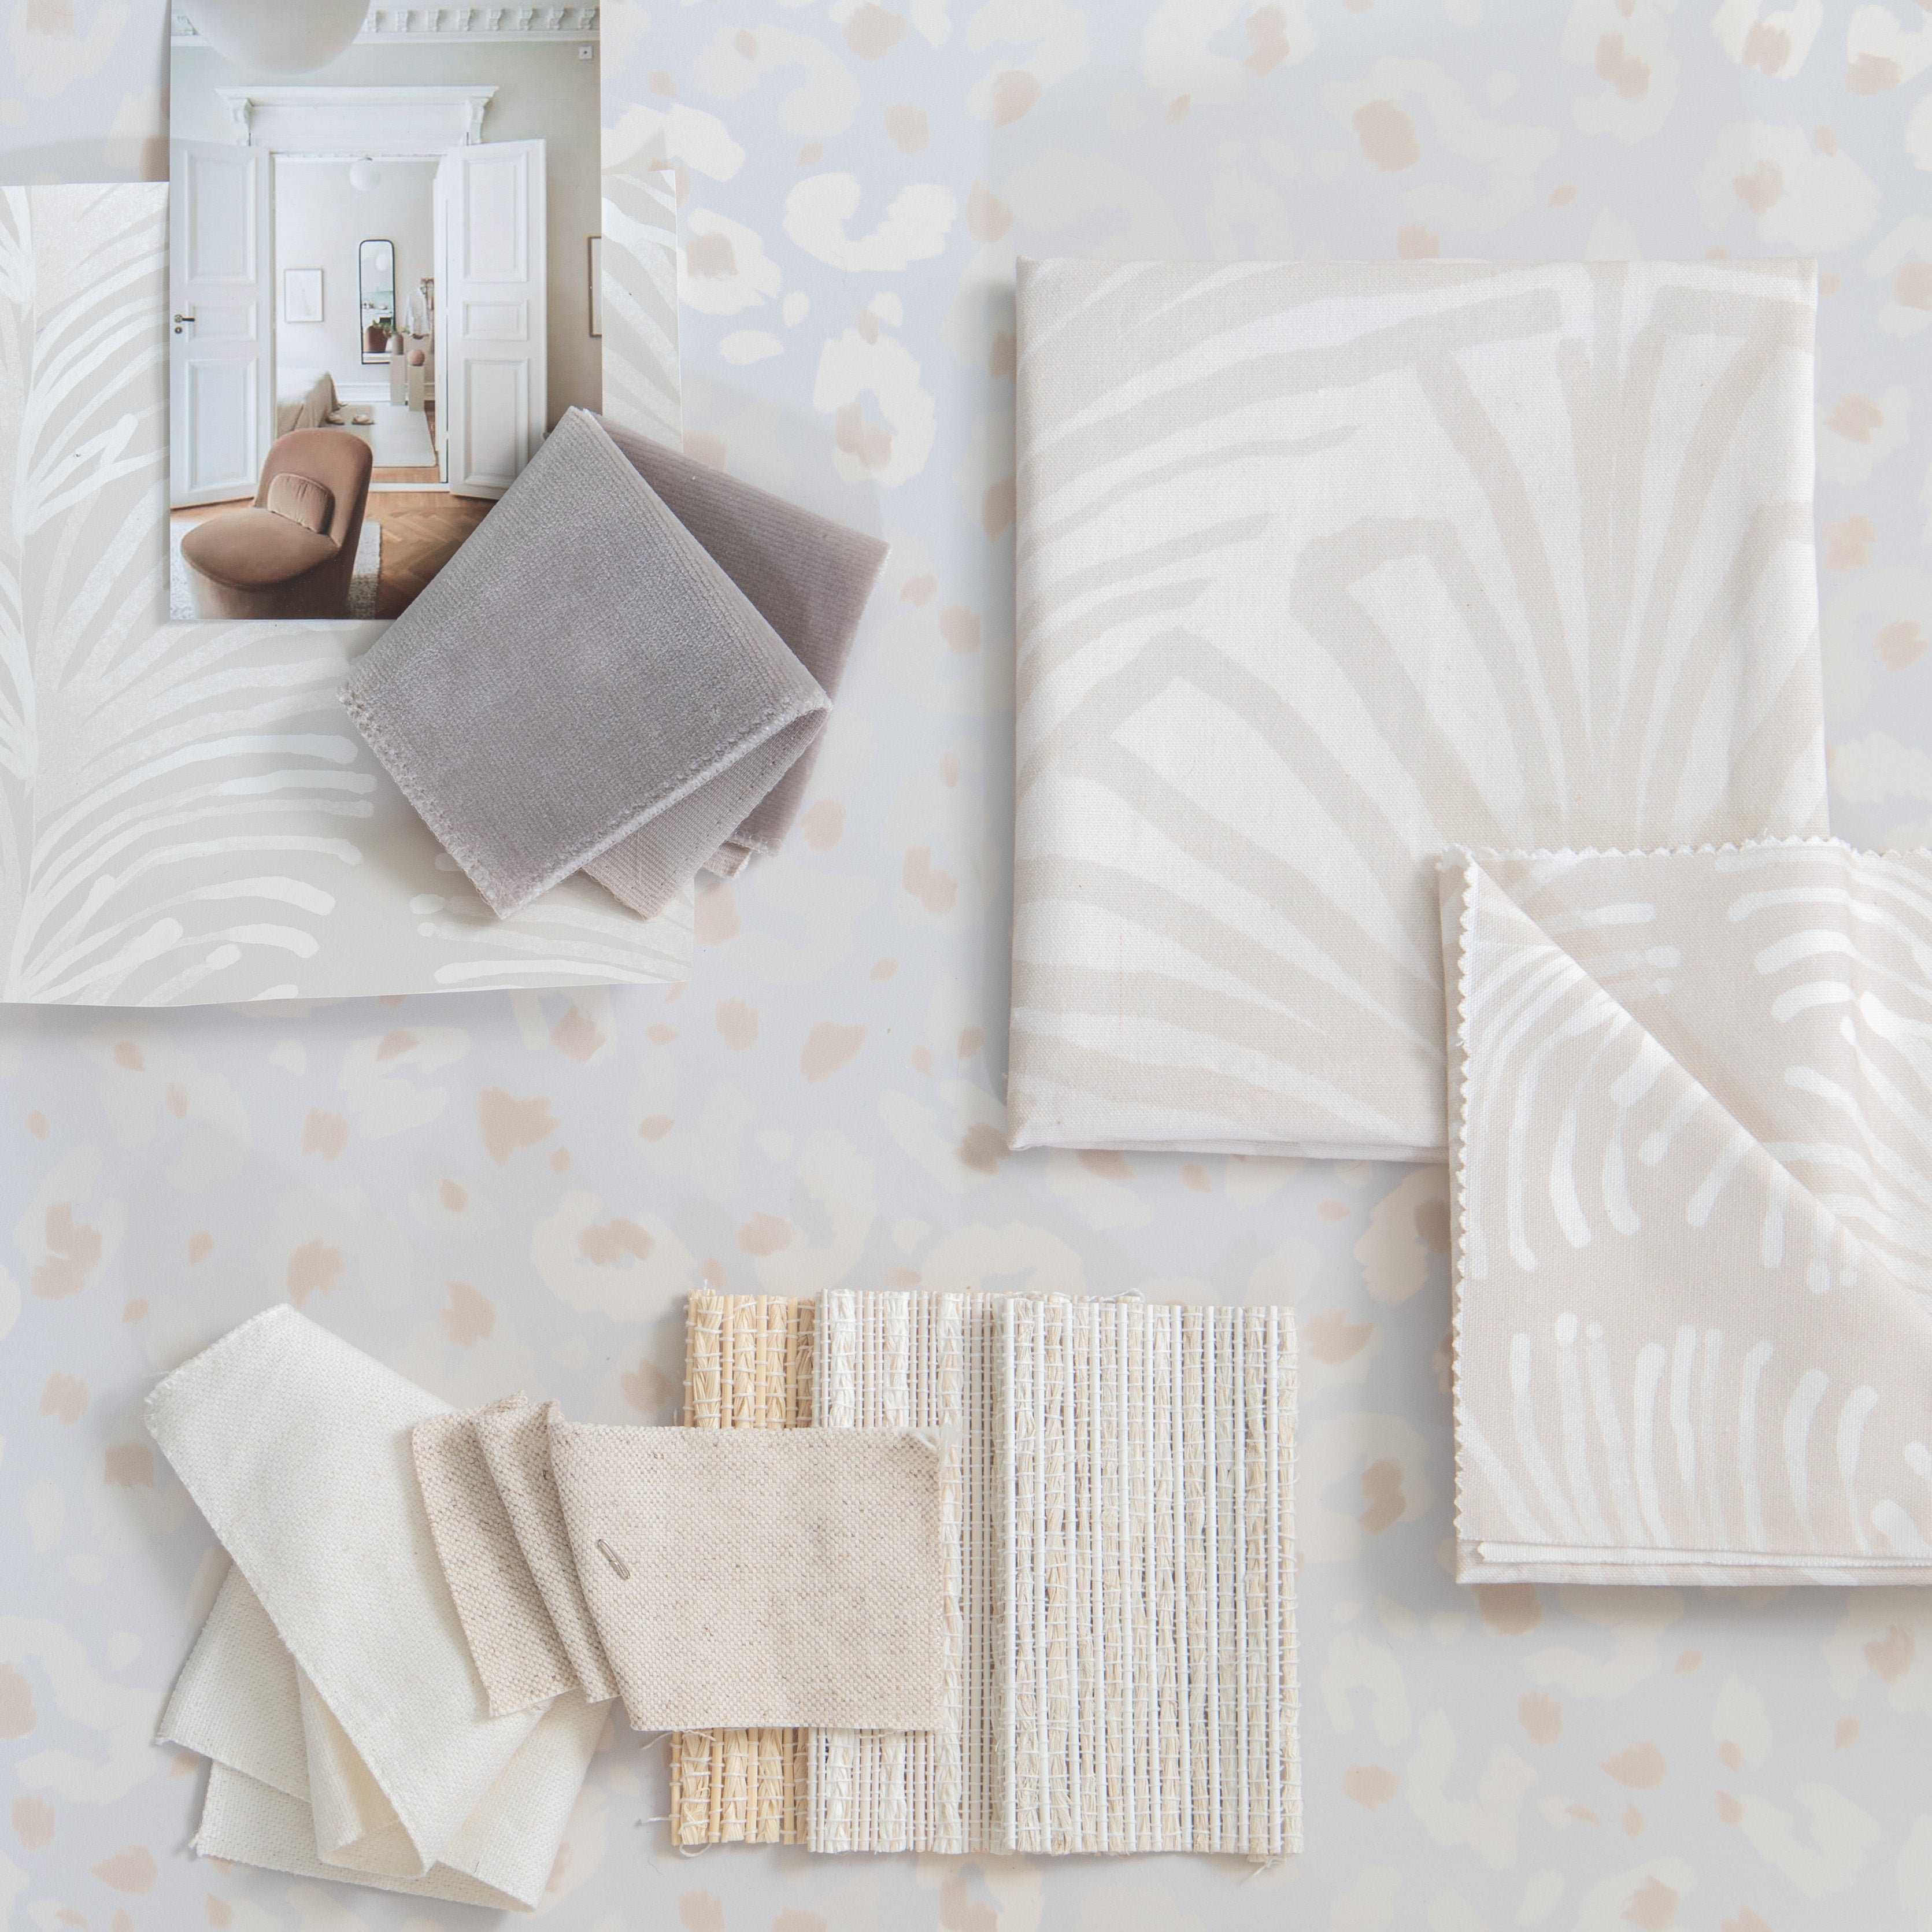 Interior design moodboard and fabric inspirations with Beige Botanical Stripe Printed Swatch and Beige Chinoiserie Tiger Printed Swatch